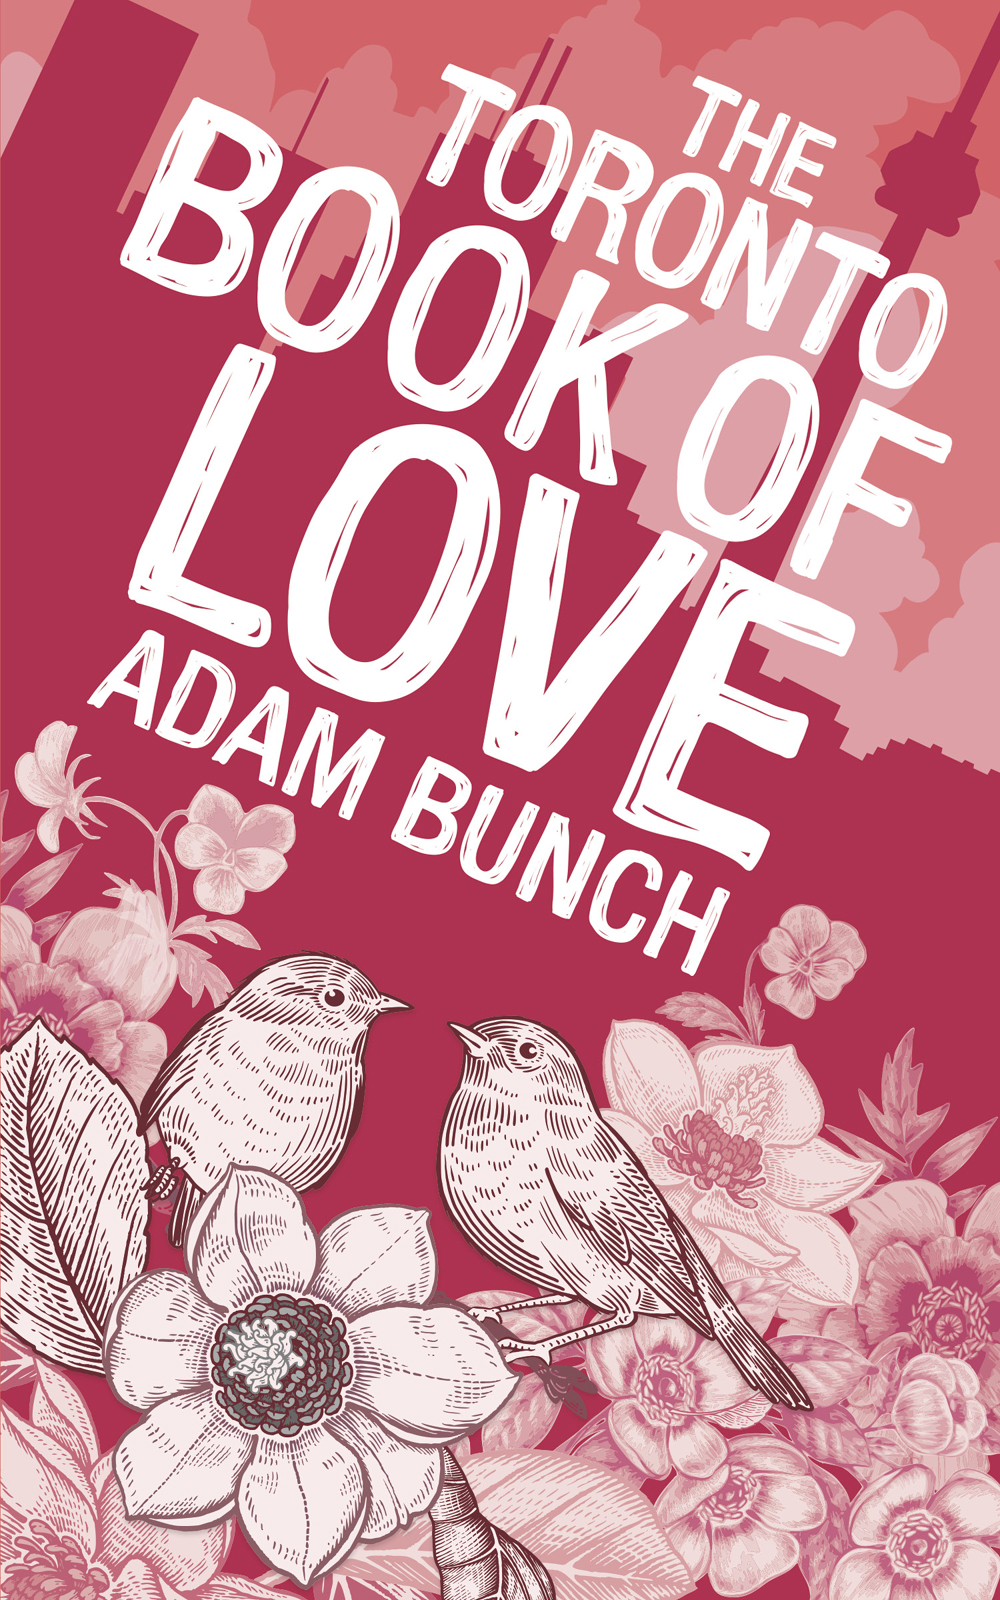 THE TORONTO BOOK OF LOVE Also by Adam Bunch The Toronto Book of the Dead - photo 1